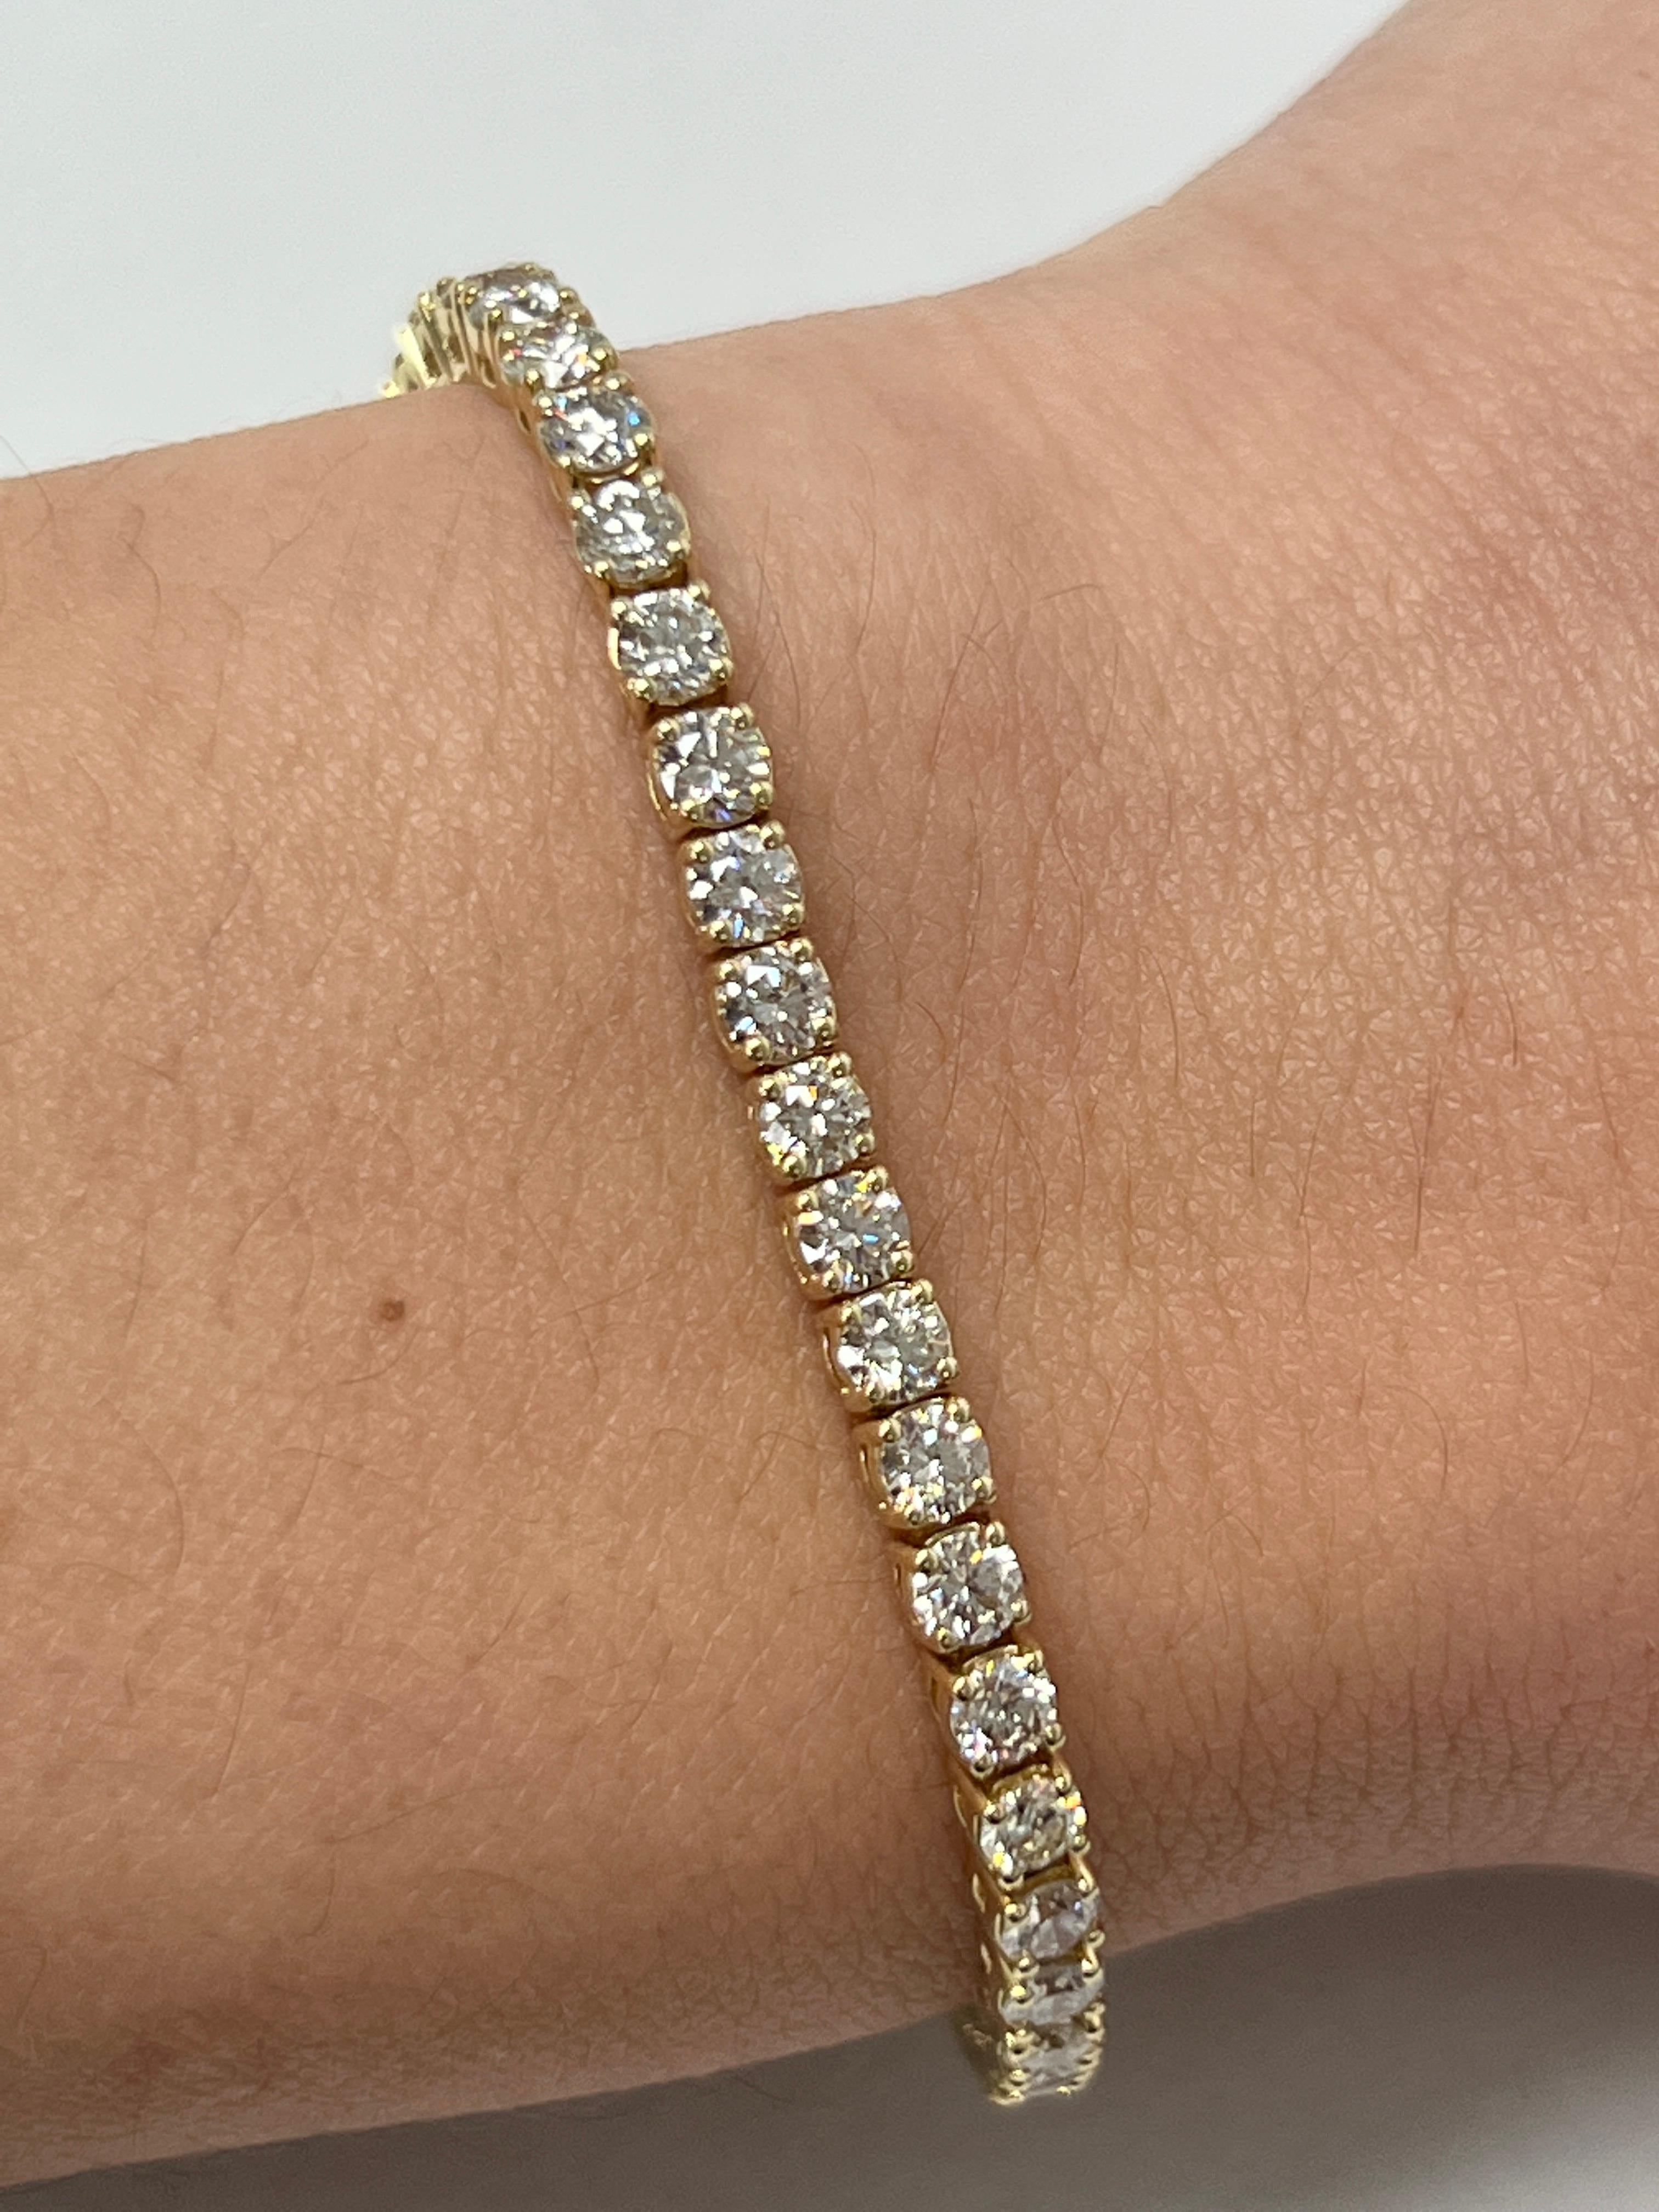 Fashion and glam are at the forefront with this exquisite diamond bracelet. This 14-karat yellow gold diamond bracelet is made from 11.4 grams of gold. The top is adorned with one row of I-J color, VS/SI clarity diamonds. This bracelet carries 54